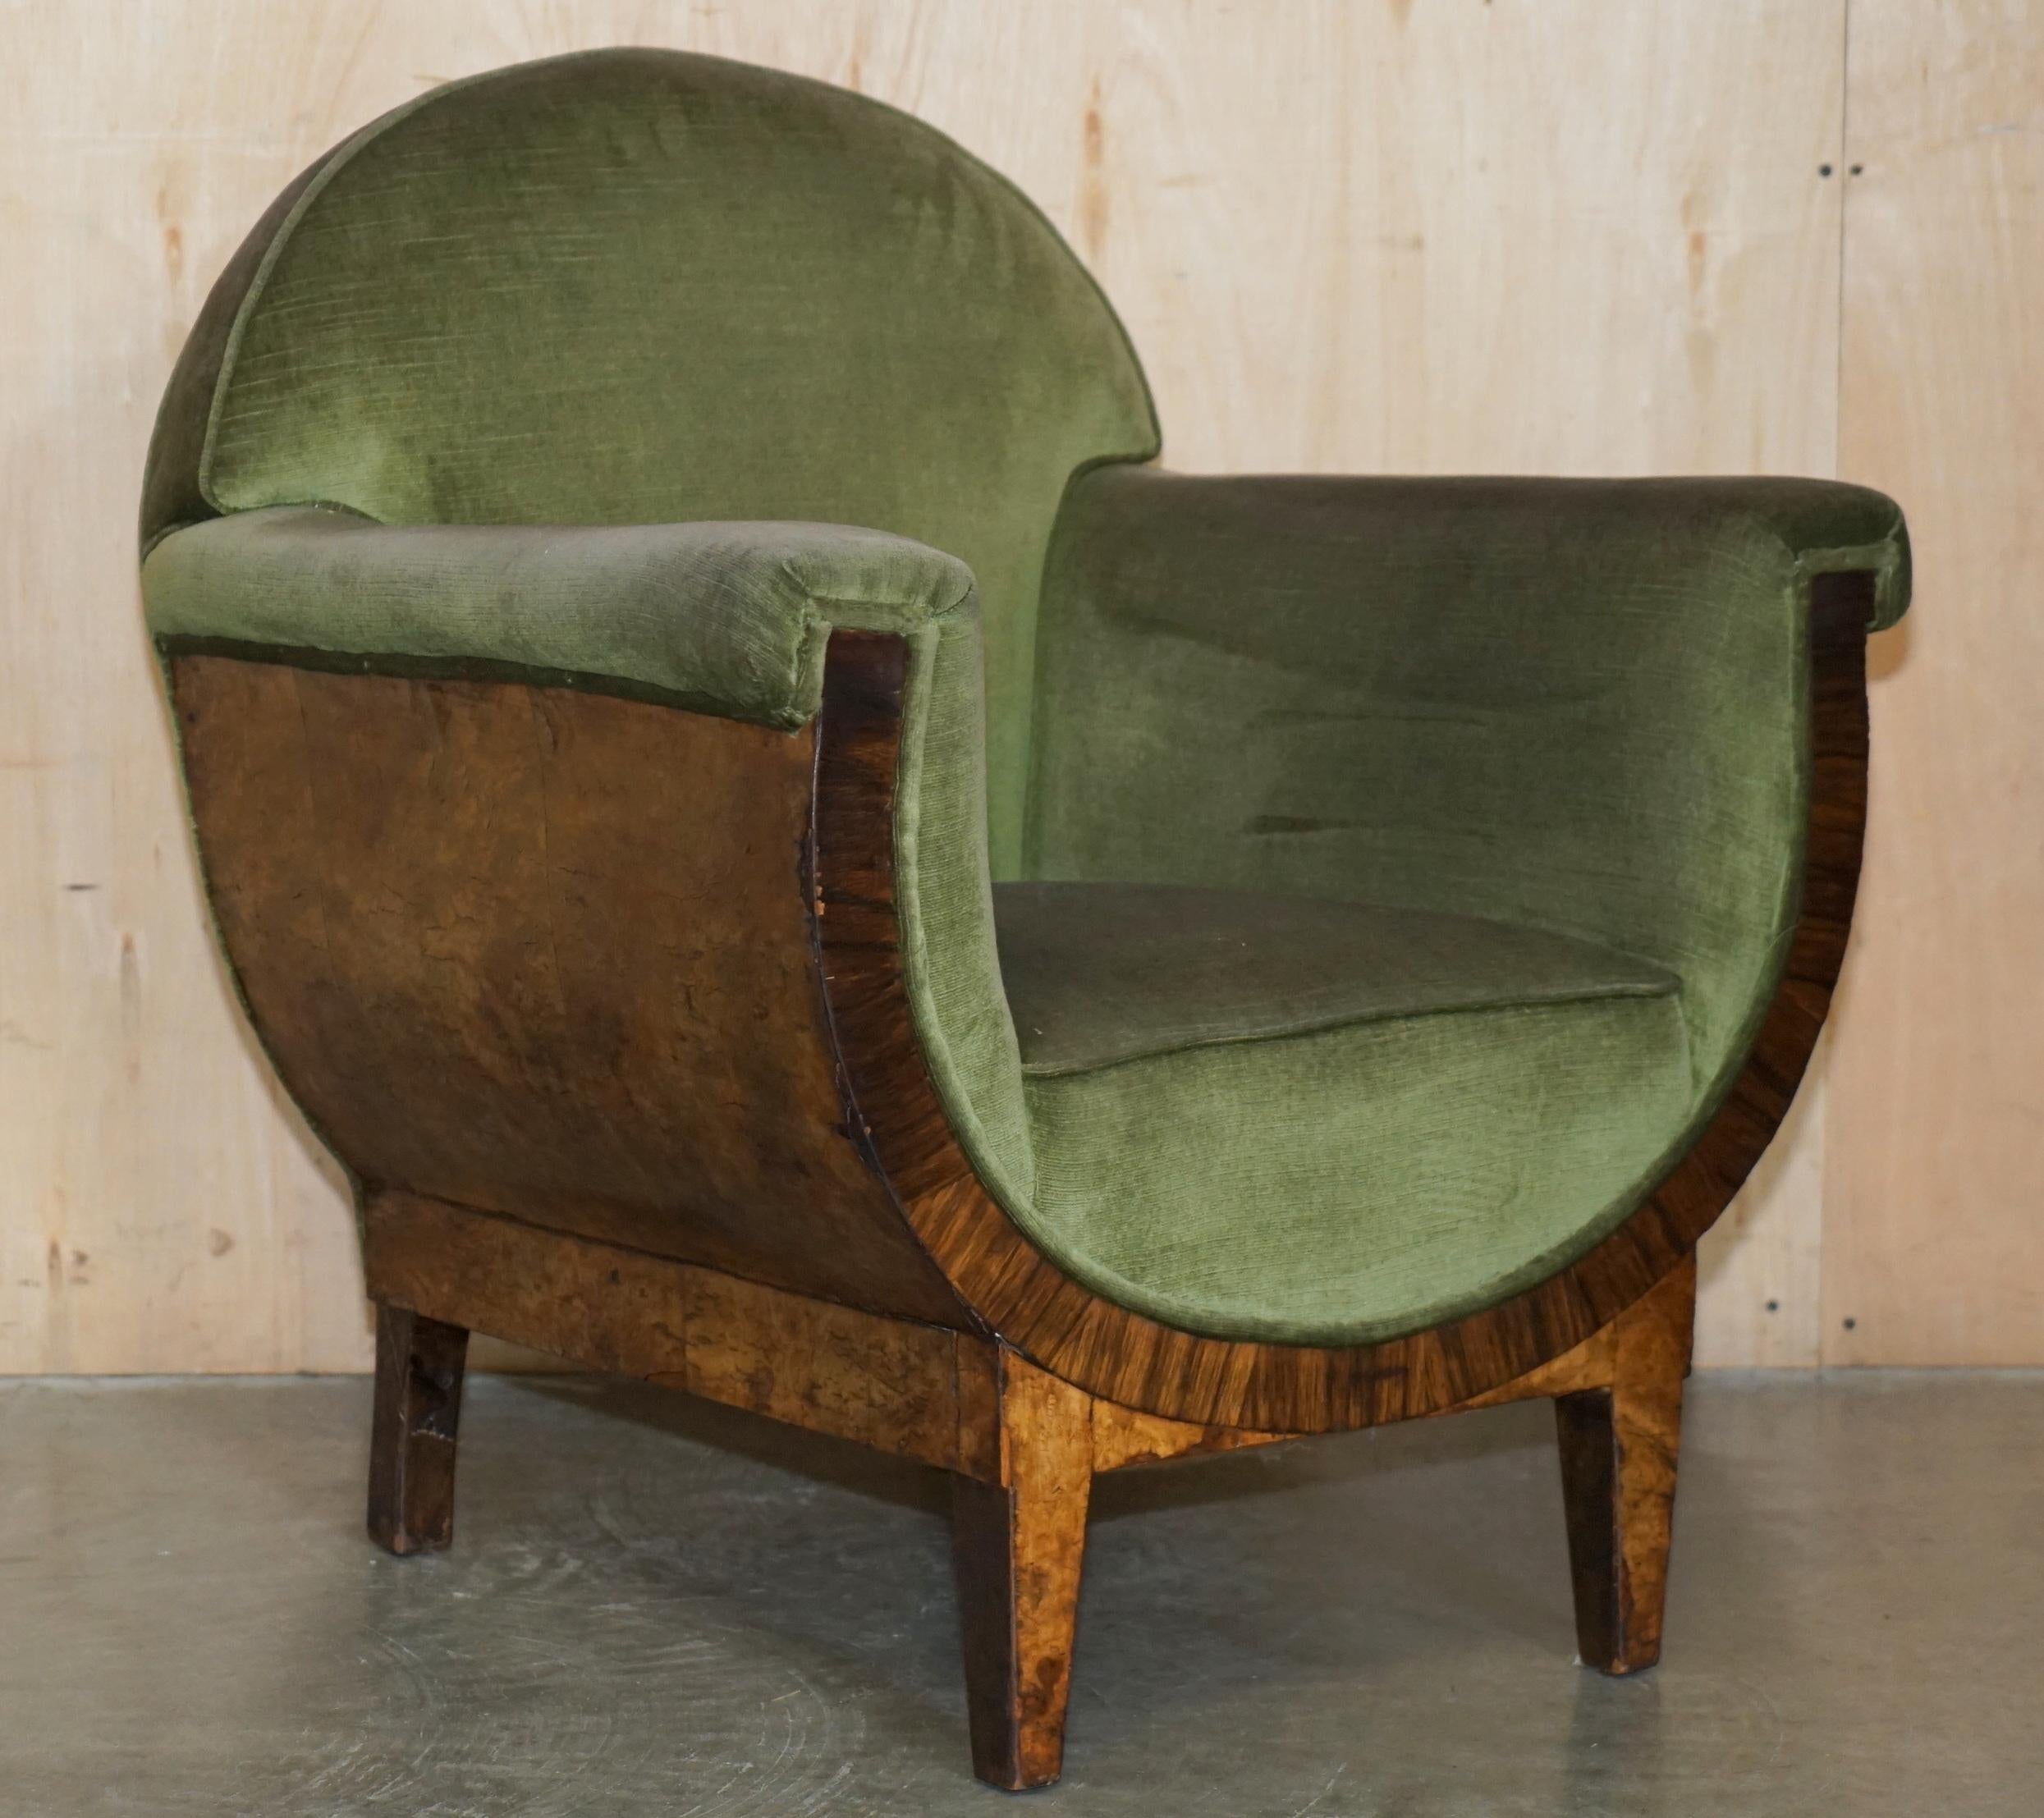 Royal House Antiques

Royal House Antiques is delighted to offer for sale this pair of exquisite circa 1920’s Art Deco Burr Walnut framed armchairs with Green Velour upholstery that is part of a suite

Please note the delivery fee listed is just a